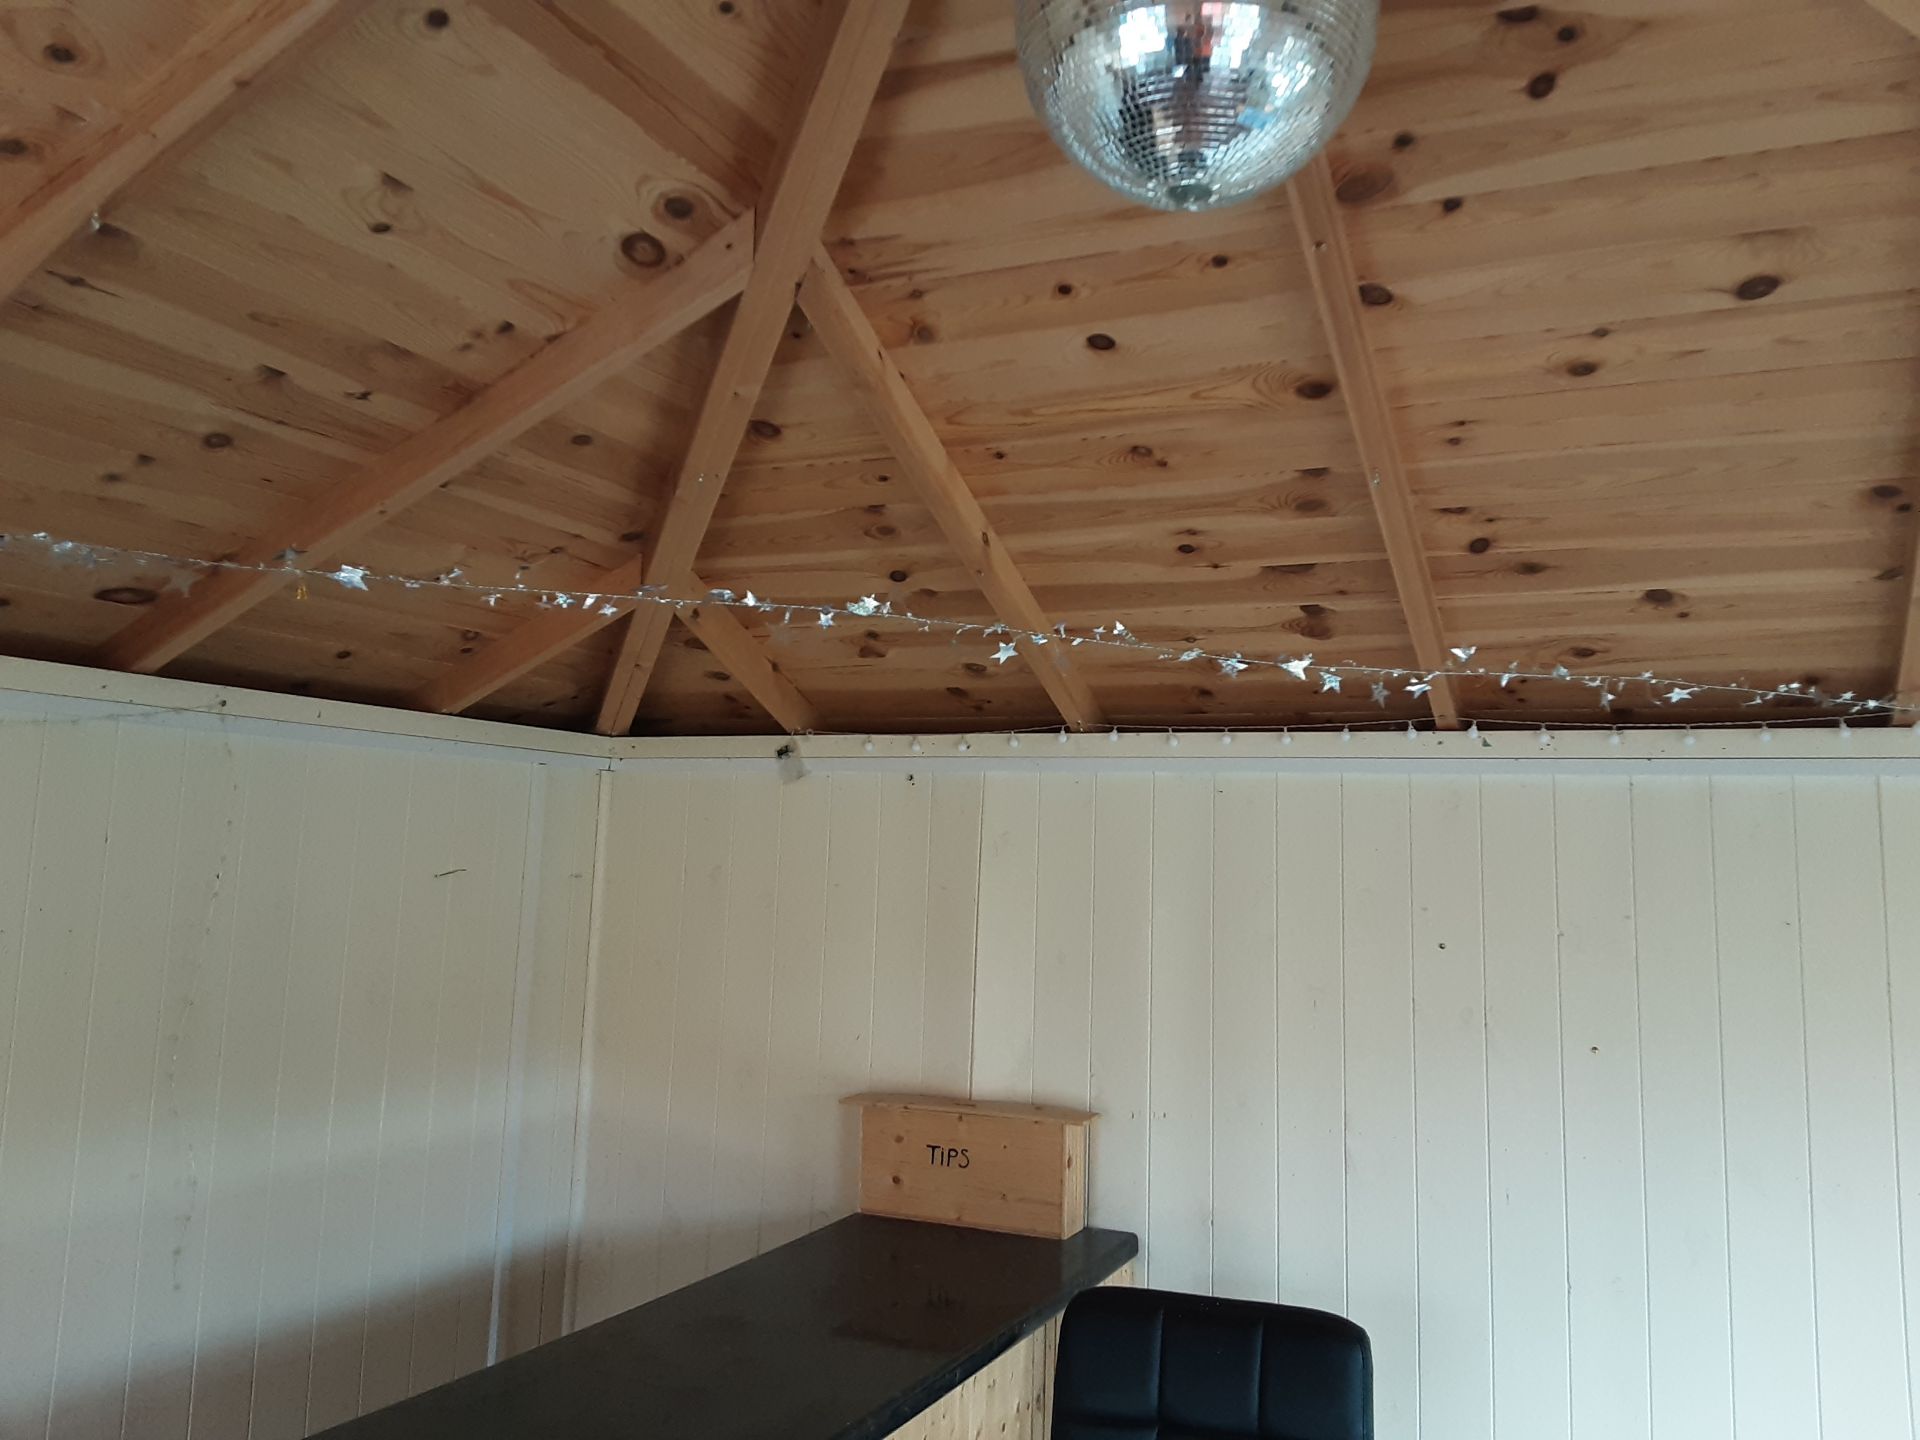 Summer House to include Inside Contents - Image 7 of 13